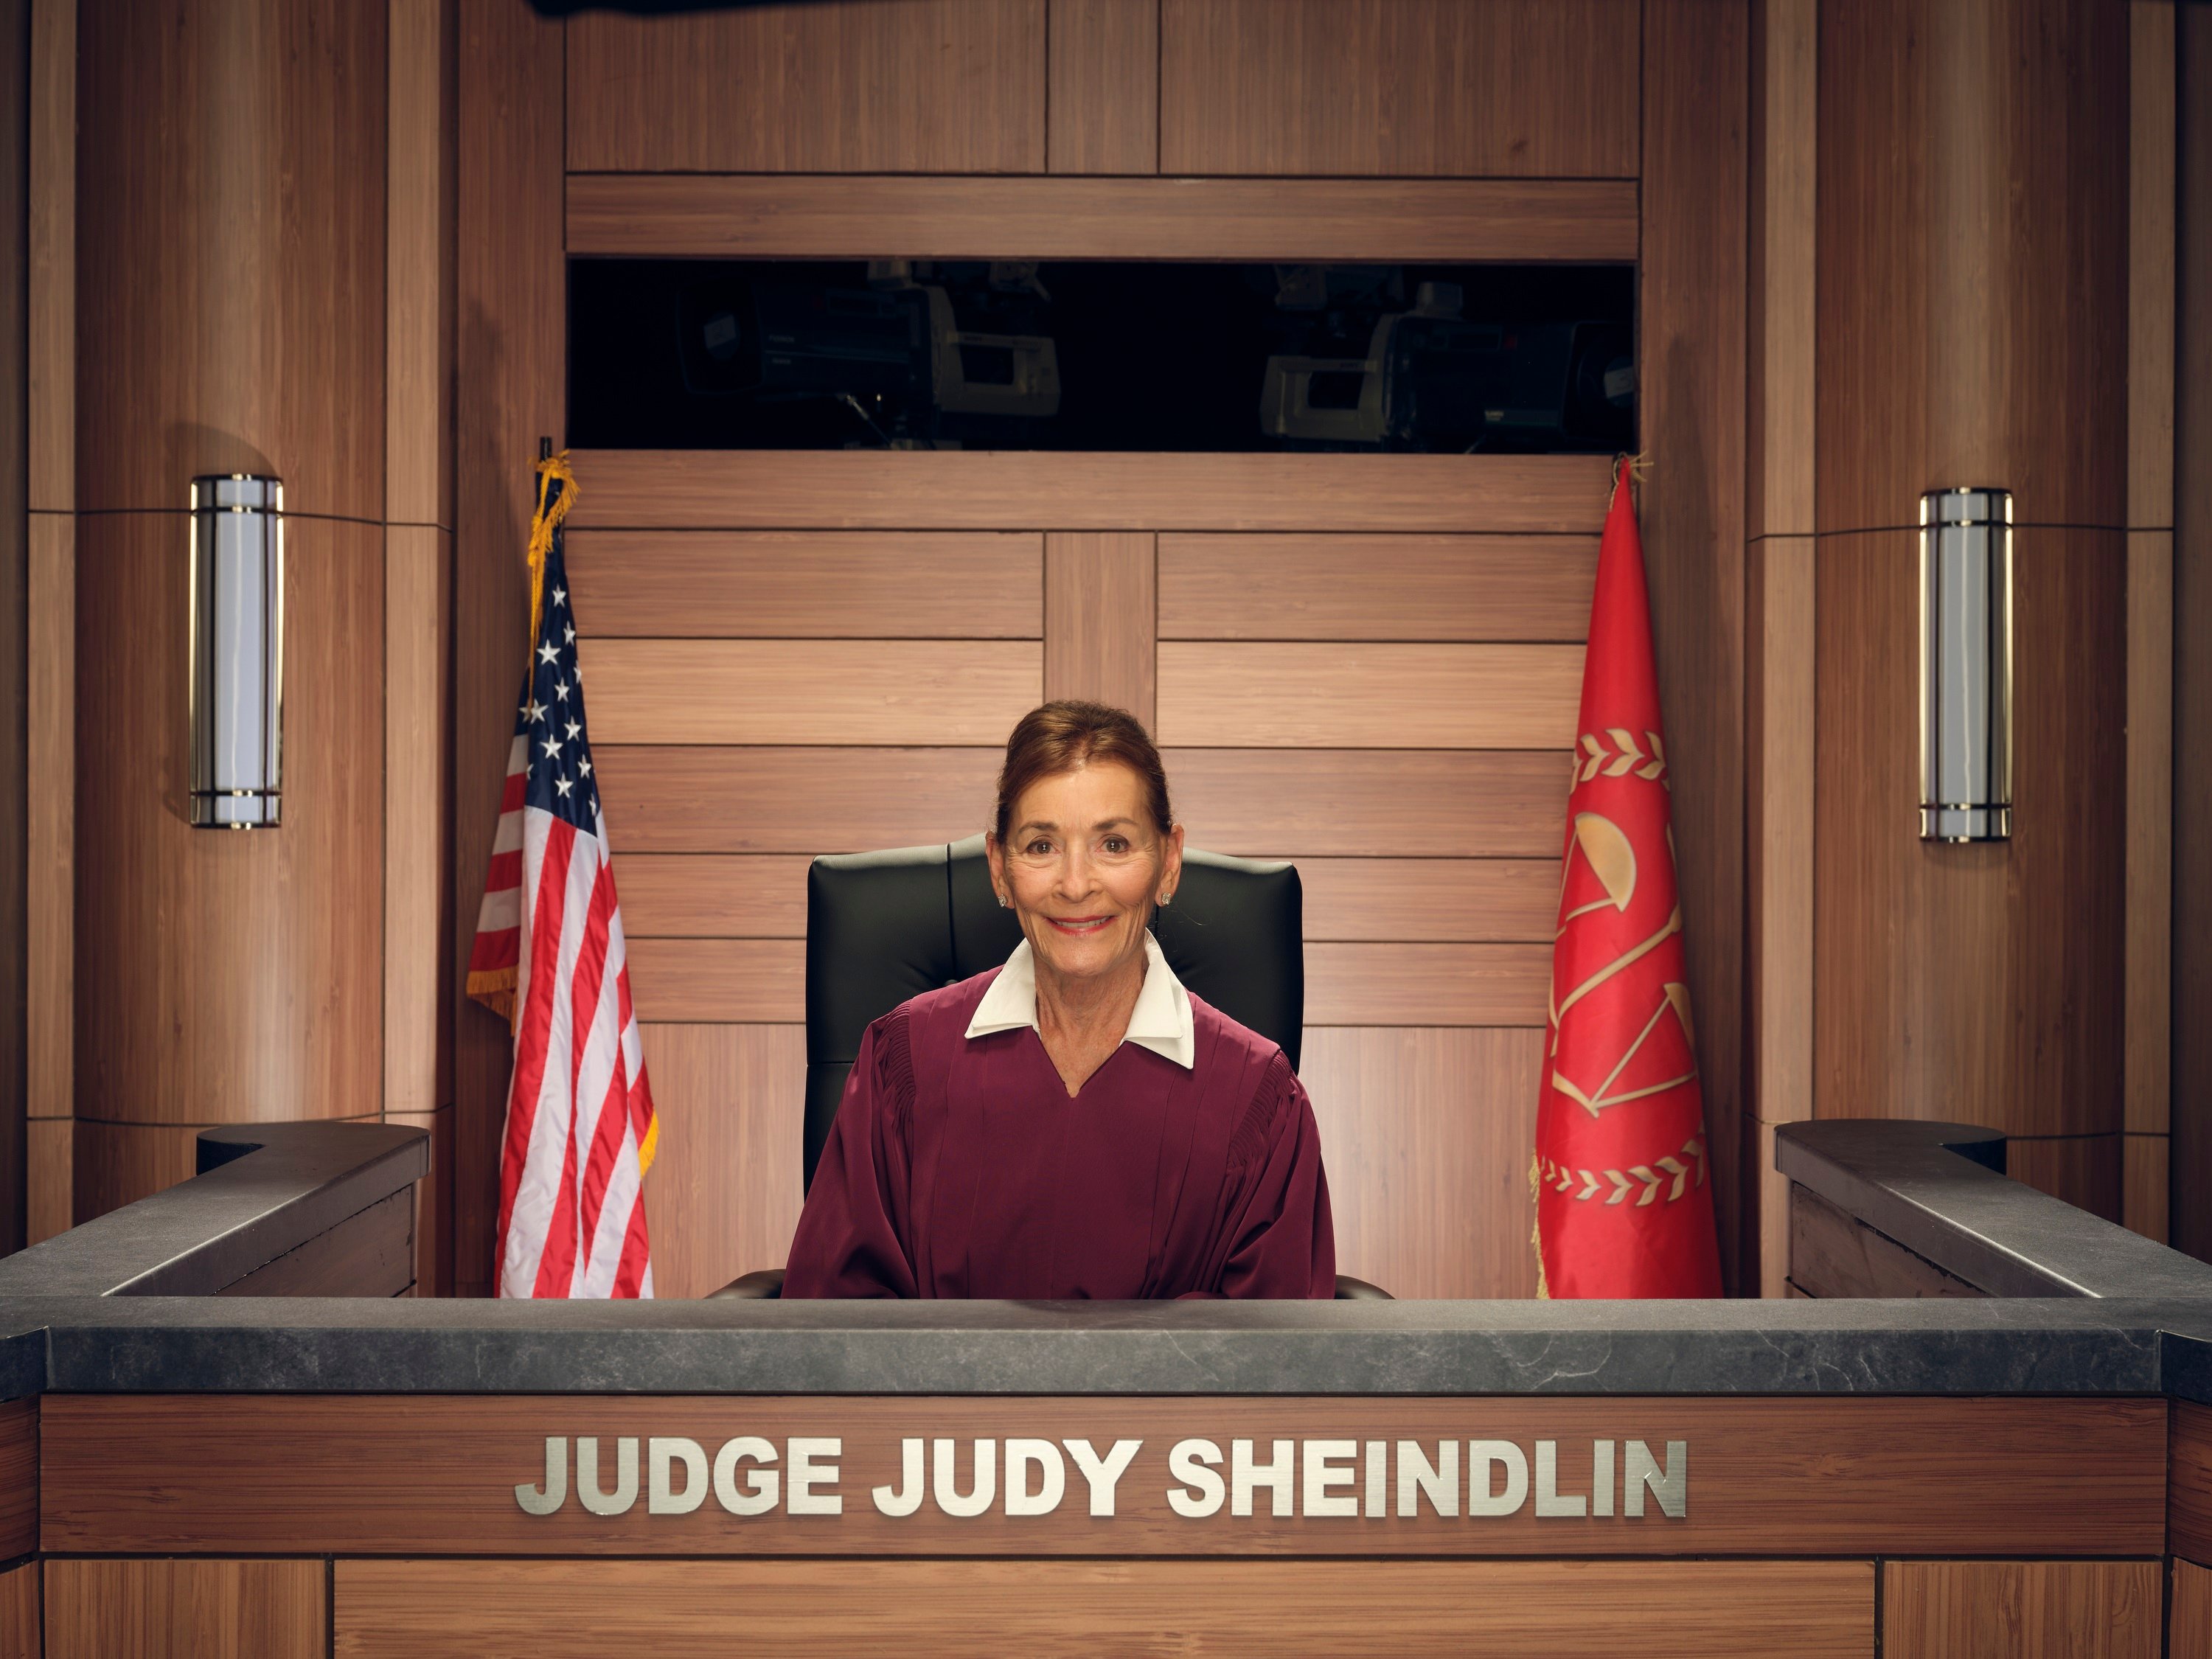 Judge Judy Sheindlin presiding over court in her new series, 'Judy Justice'